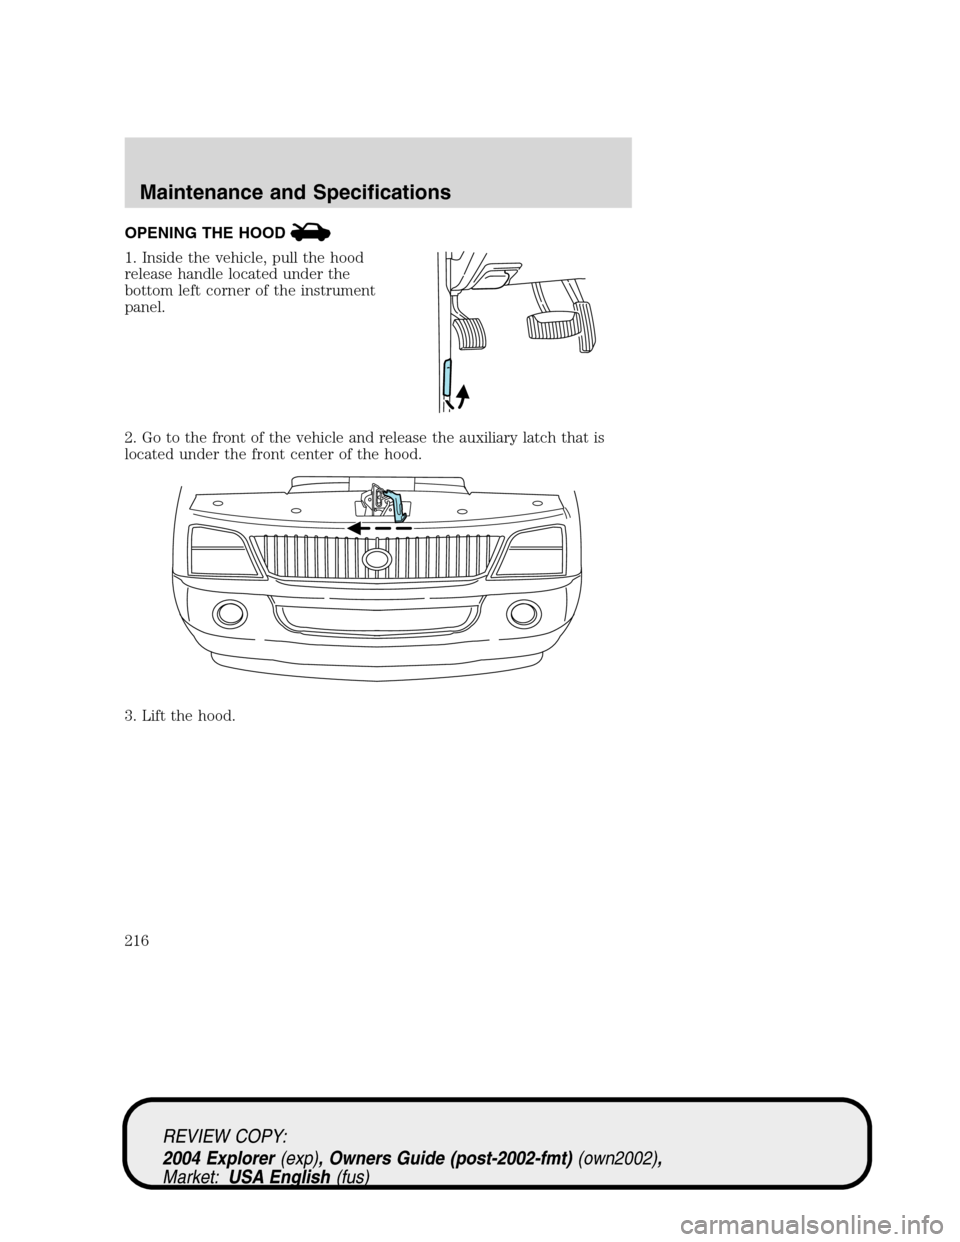 Mercury Mountaineer 2004  s Owners Guide OPENING THE HOOD
1. Inside the vehicle, pull the hood
release handle located under the
bottom left corner of the instrument
panel.
2. Go to the front of the vehicle and release the auxiliary latch tha